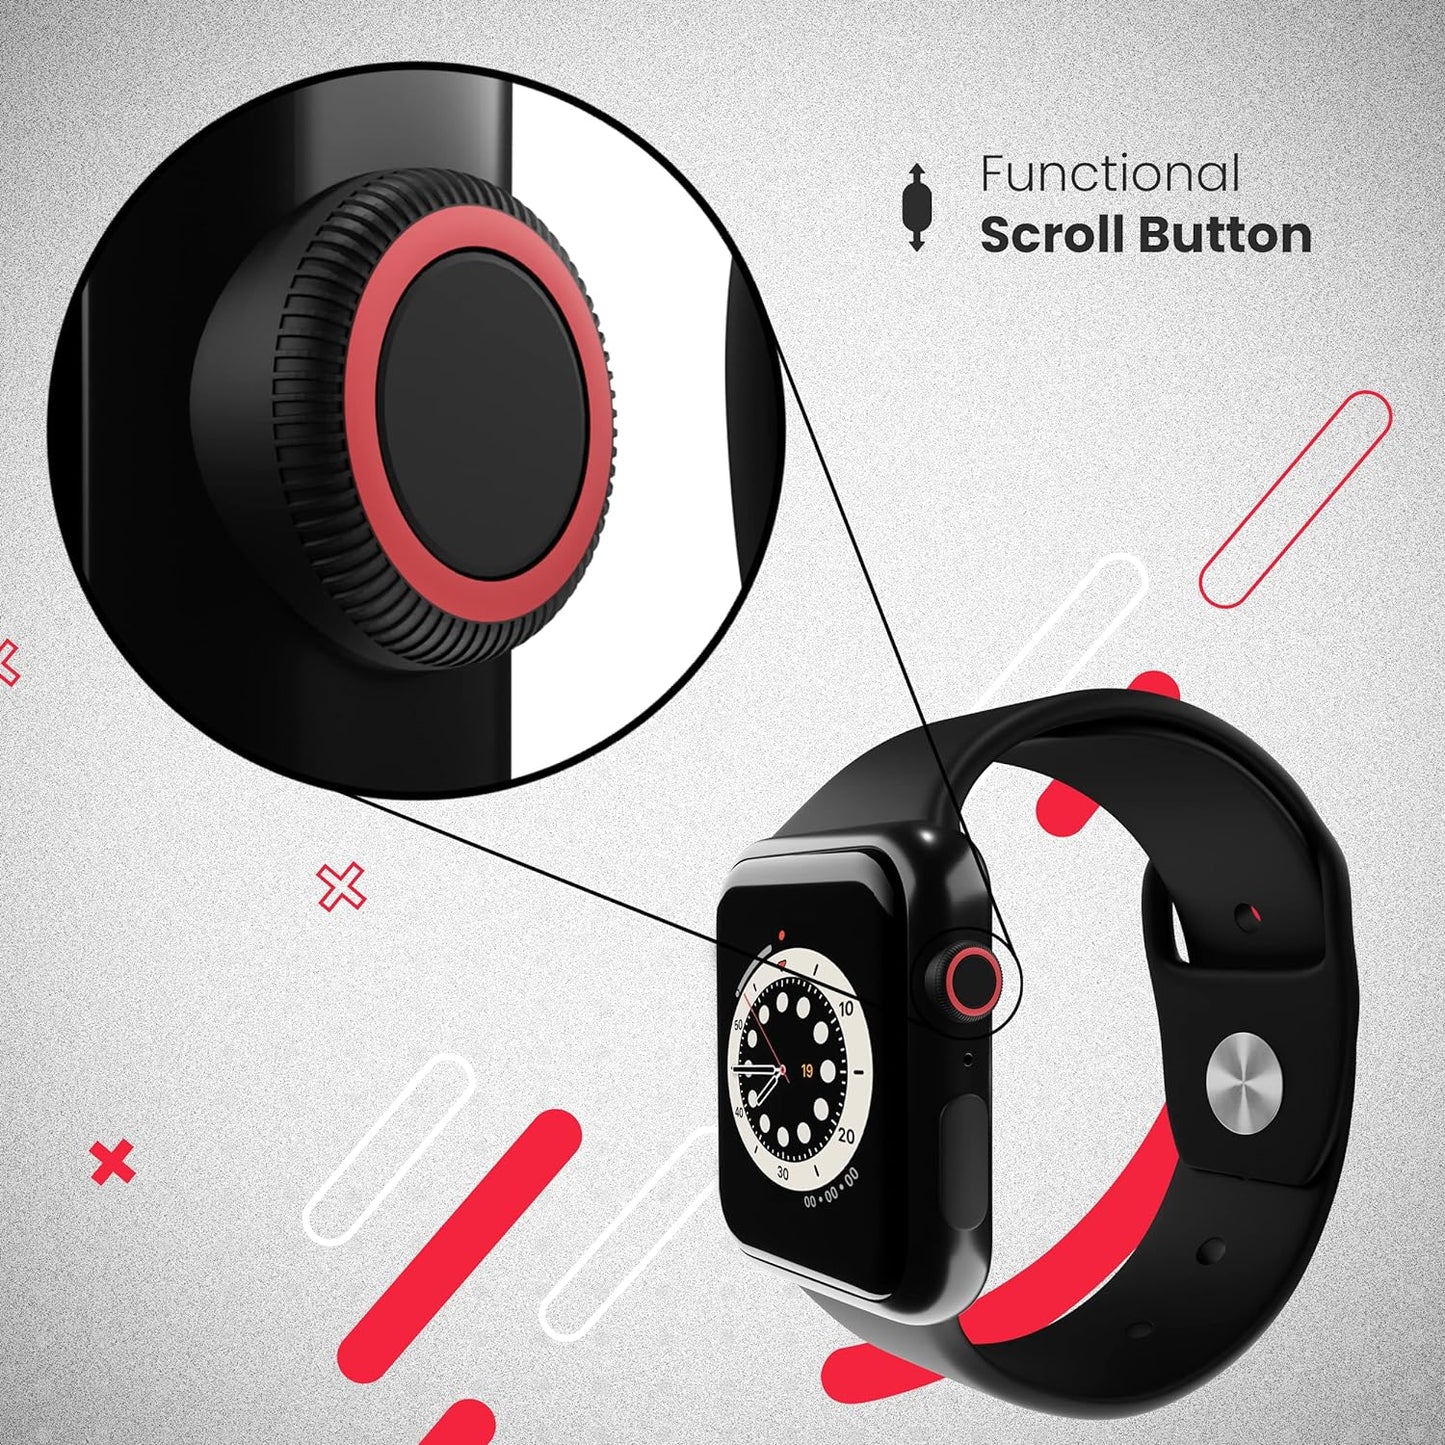 IAIR W5 Bluetooth Calling Smart Watch | Functional Scroll Button | 1.75”HD IPS Curved Touch Screen with Color Display, IP68 Waterproof